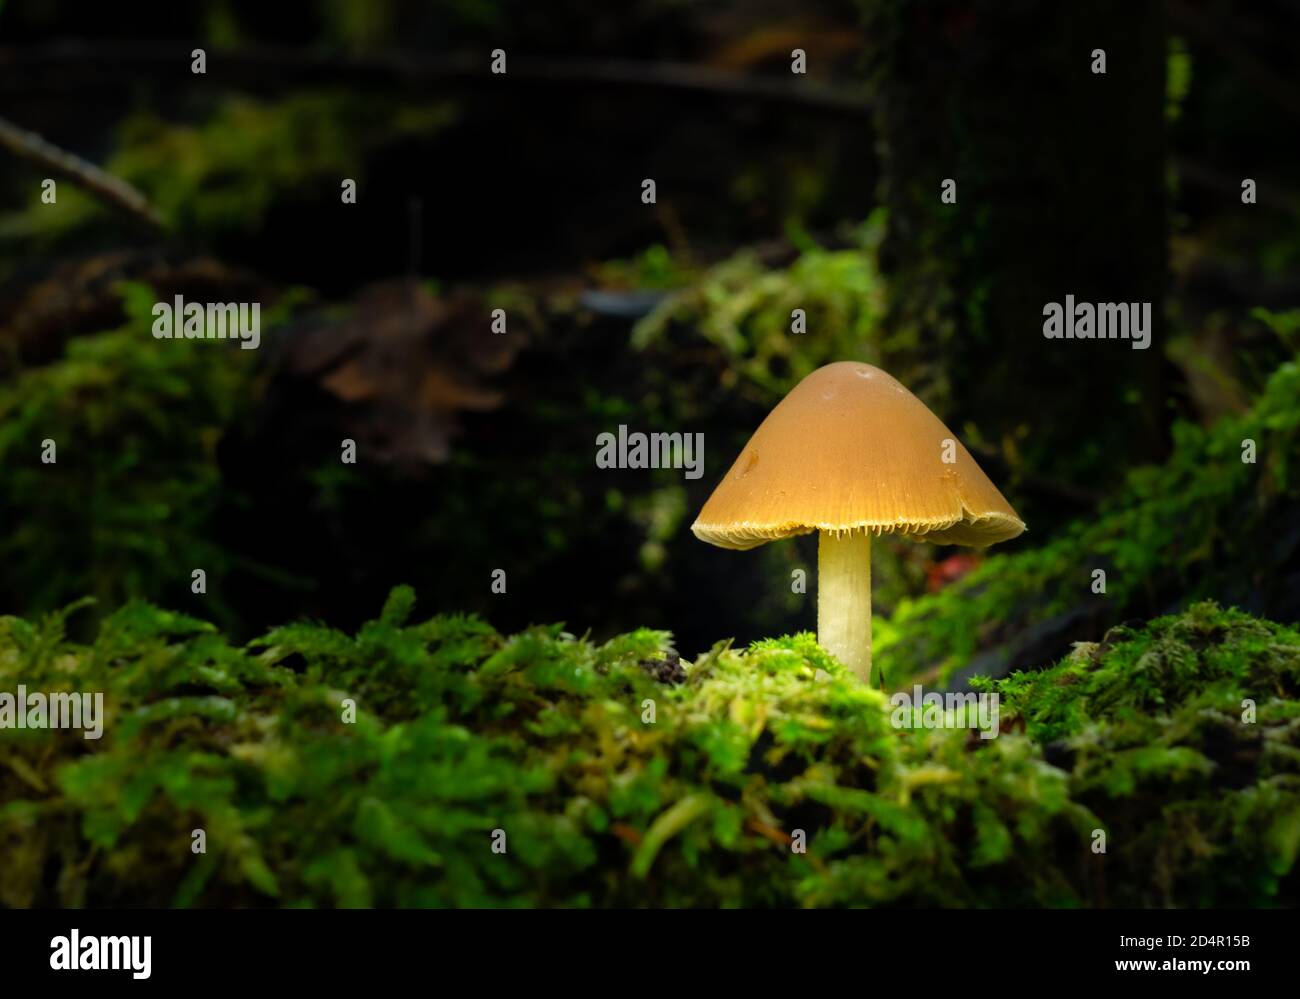 Toadstool growing out of dead wood covered in moss Stock Photo